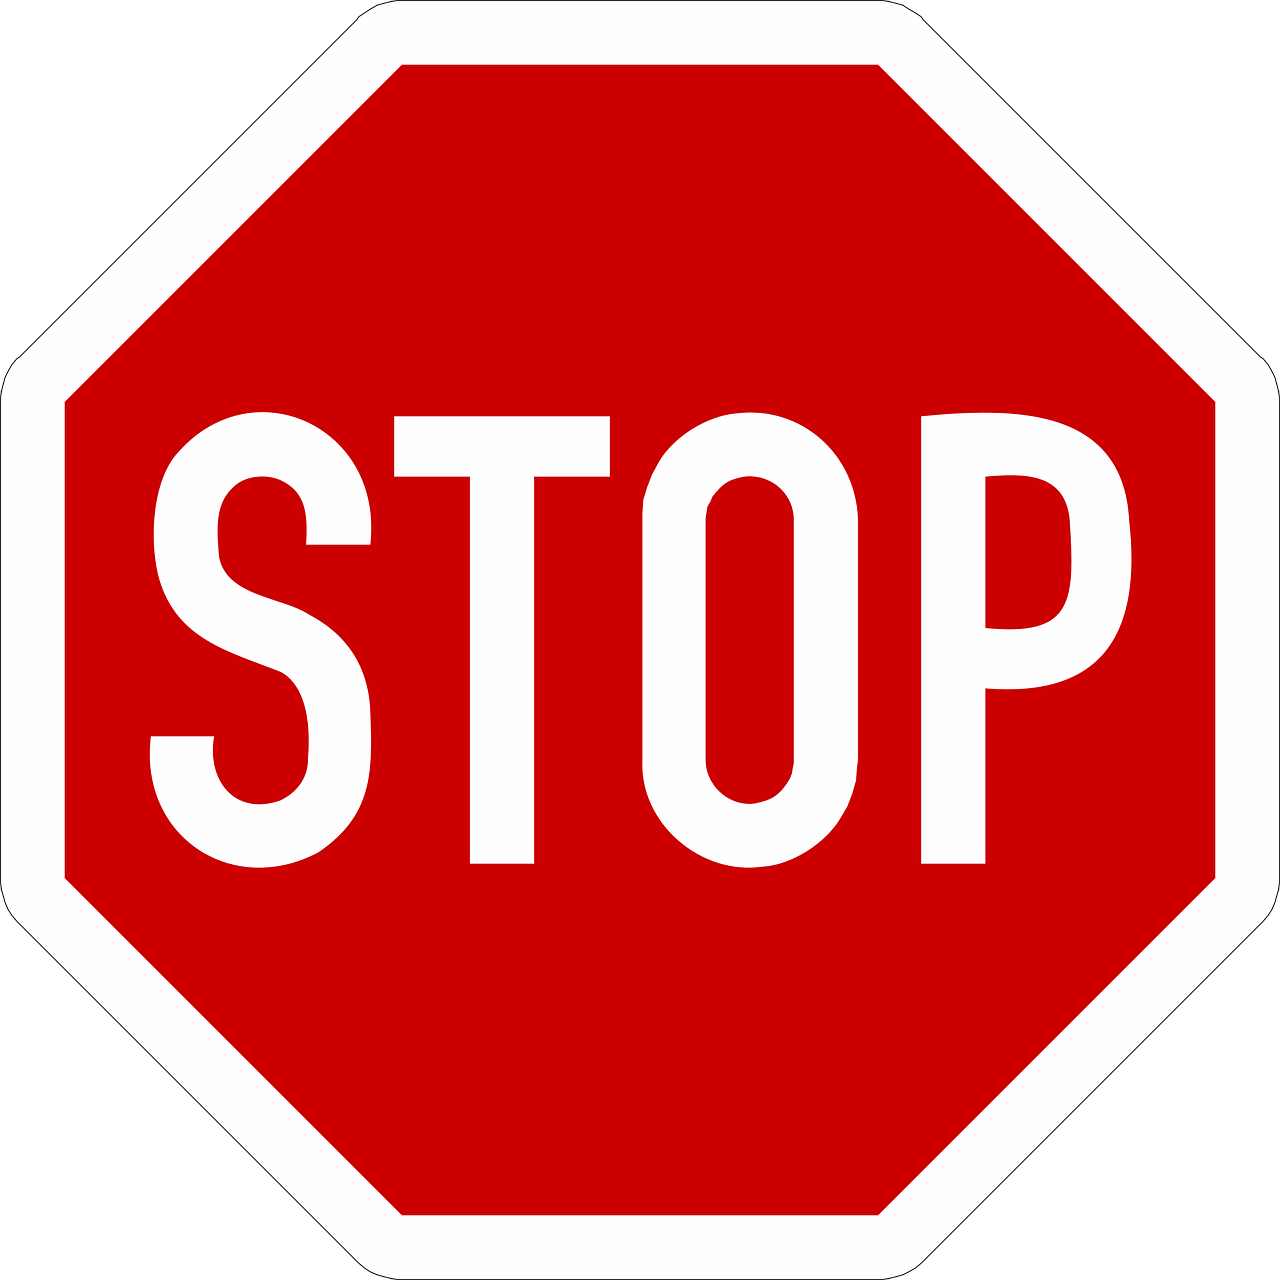 Red and white stop sign